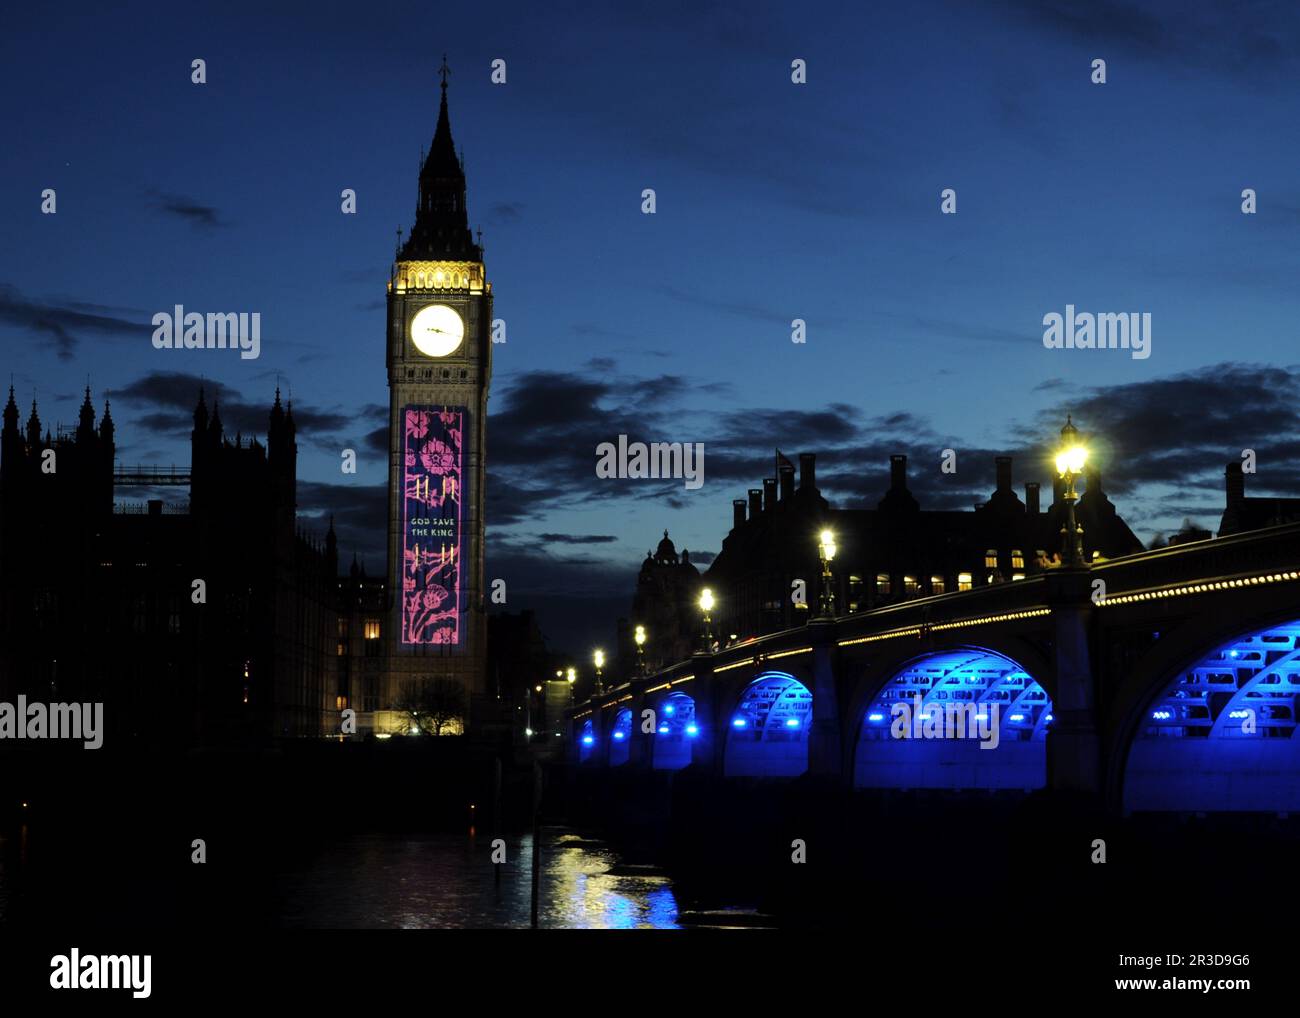 Elizabeth Tower with light display celebrating coronation of King Charles III with Westminster Bridge on right, London, UK. Stock Photo